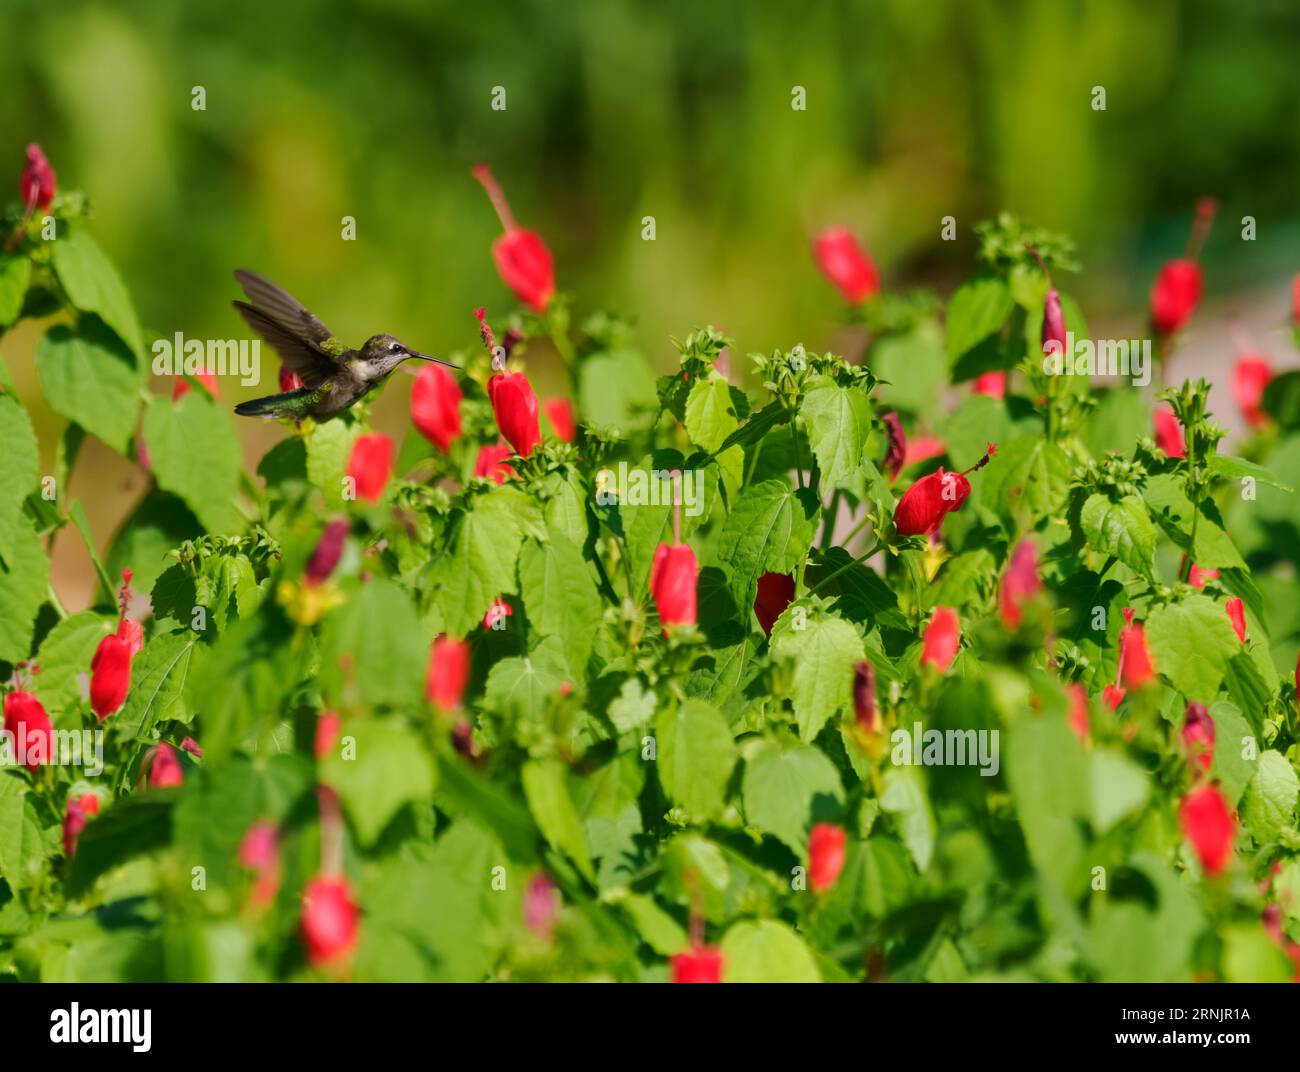 Female Ruby Throated Hummingbird hovering in a flower bed with red Turk's cap flowers. Photographed with a shallow depth of field. Stock Photo